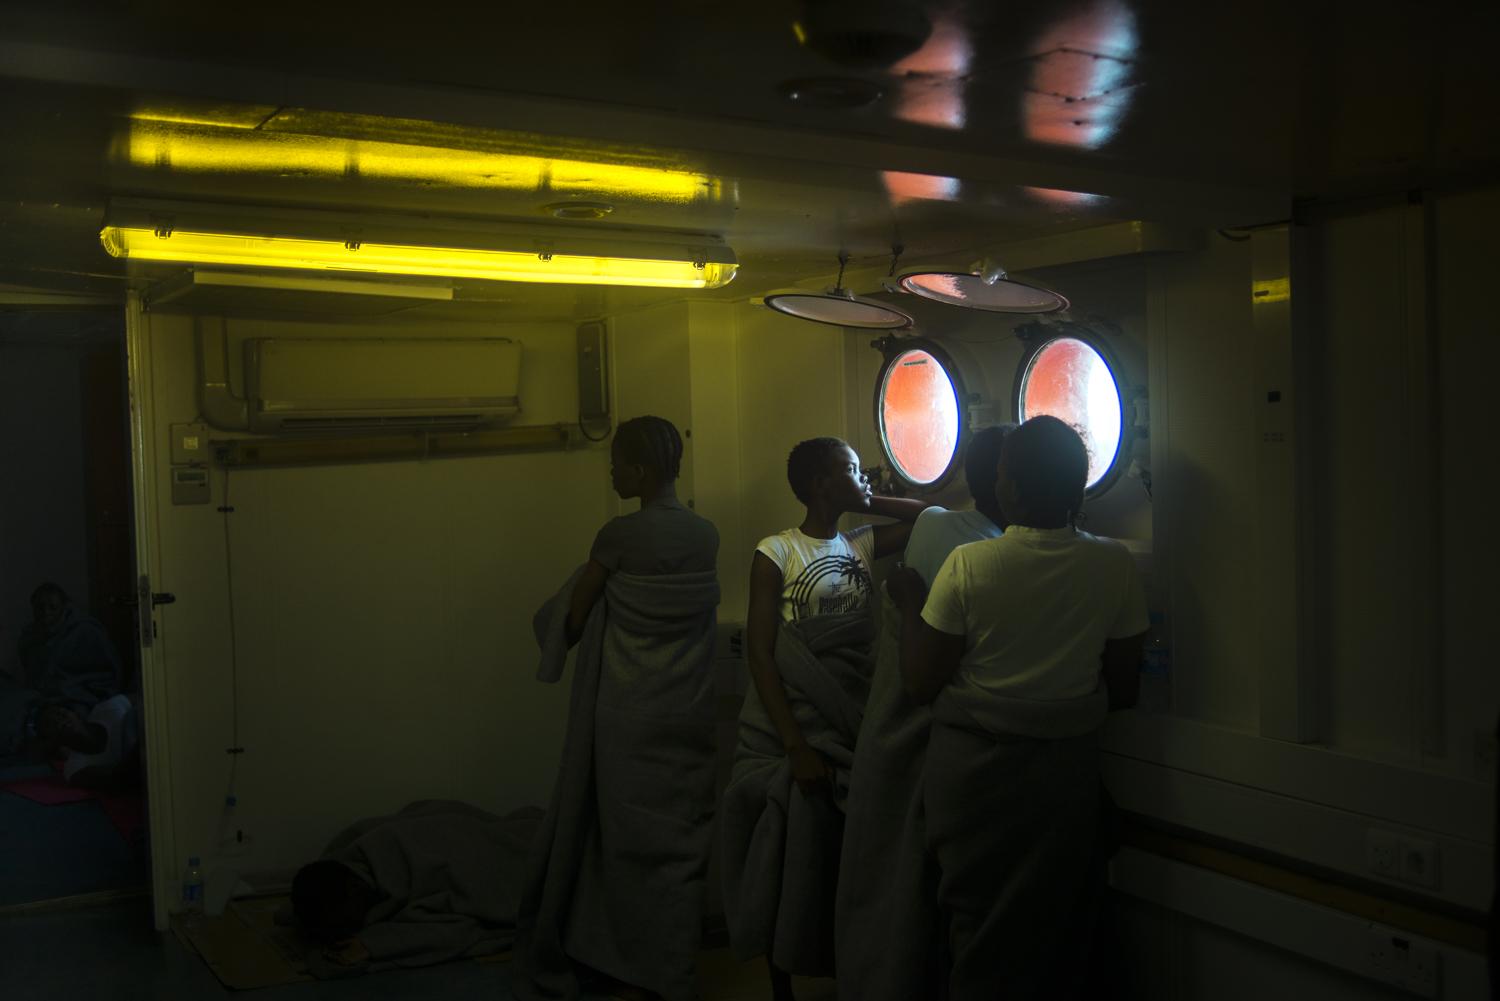 Humanitarian rescue operations in the Mediterranean Sea, by the European civil organization Sos Méditerranée in partnership with Médecins du Monde: Onboard, West African women have a rest and meditate looking throw the Mediterranean